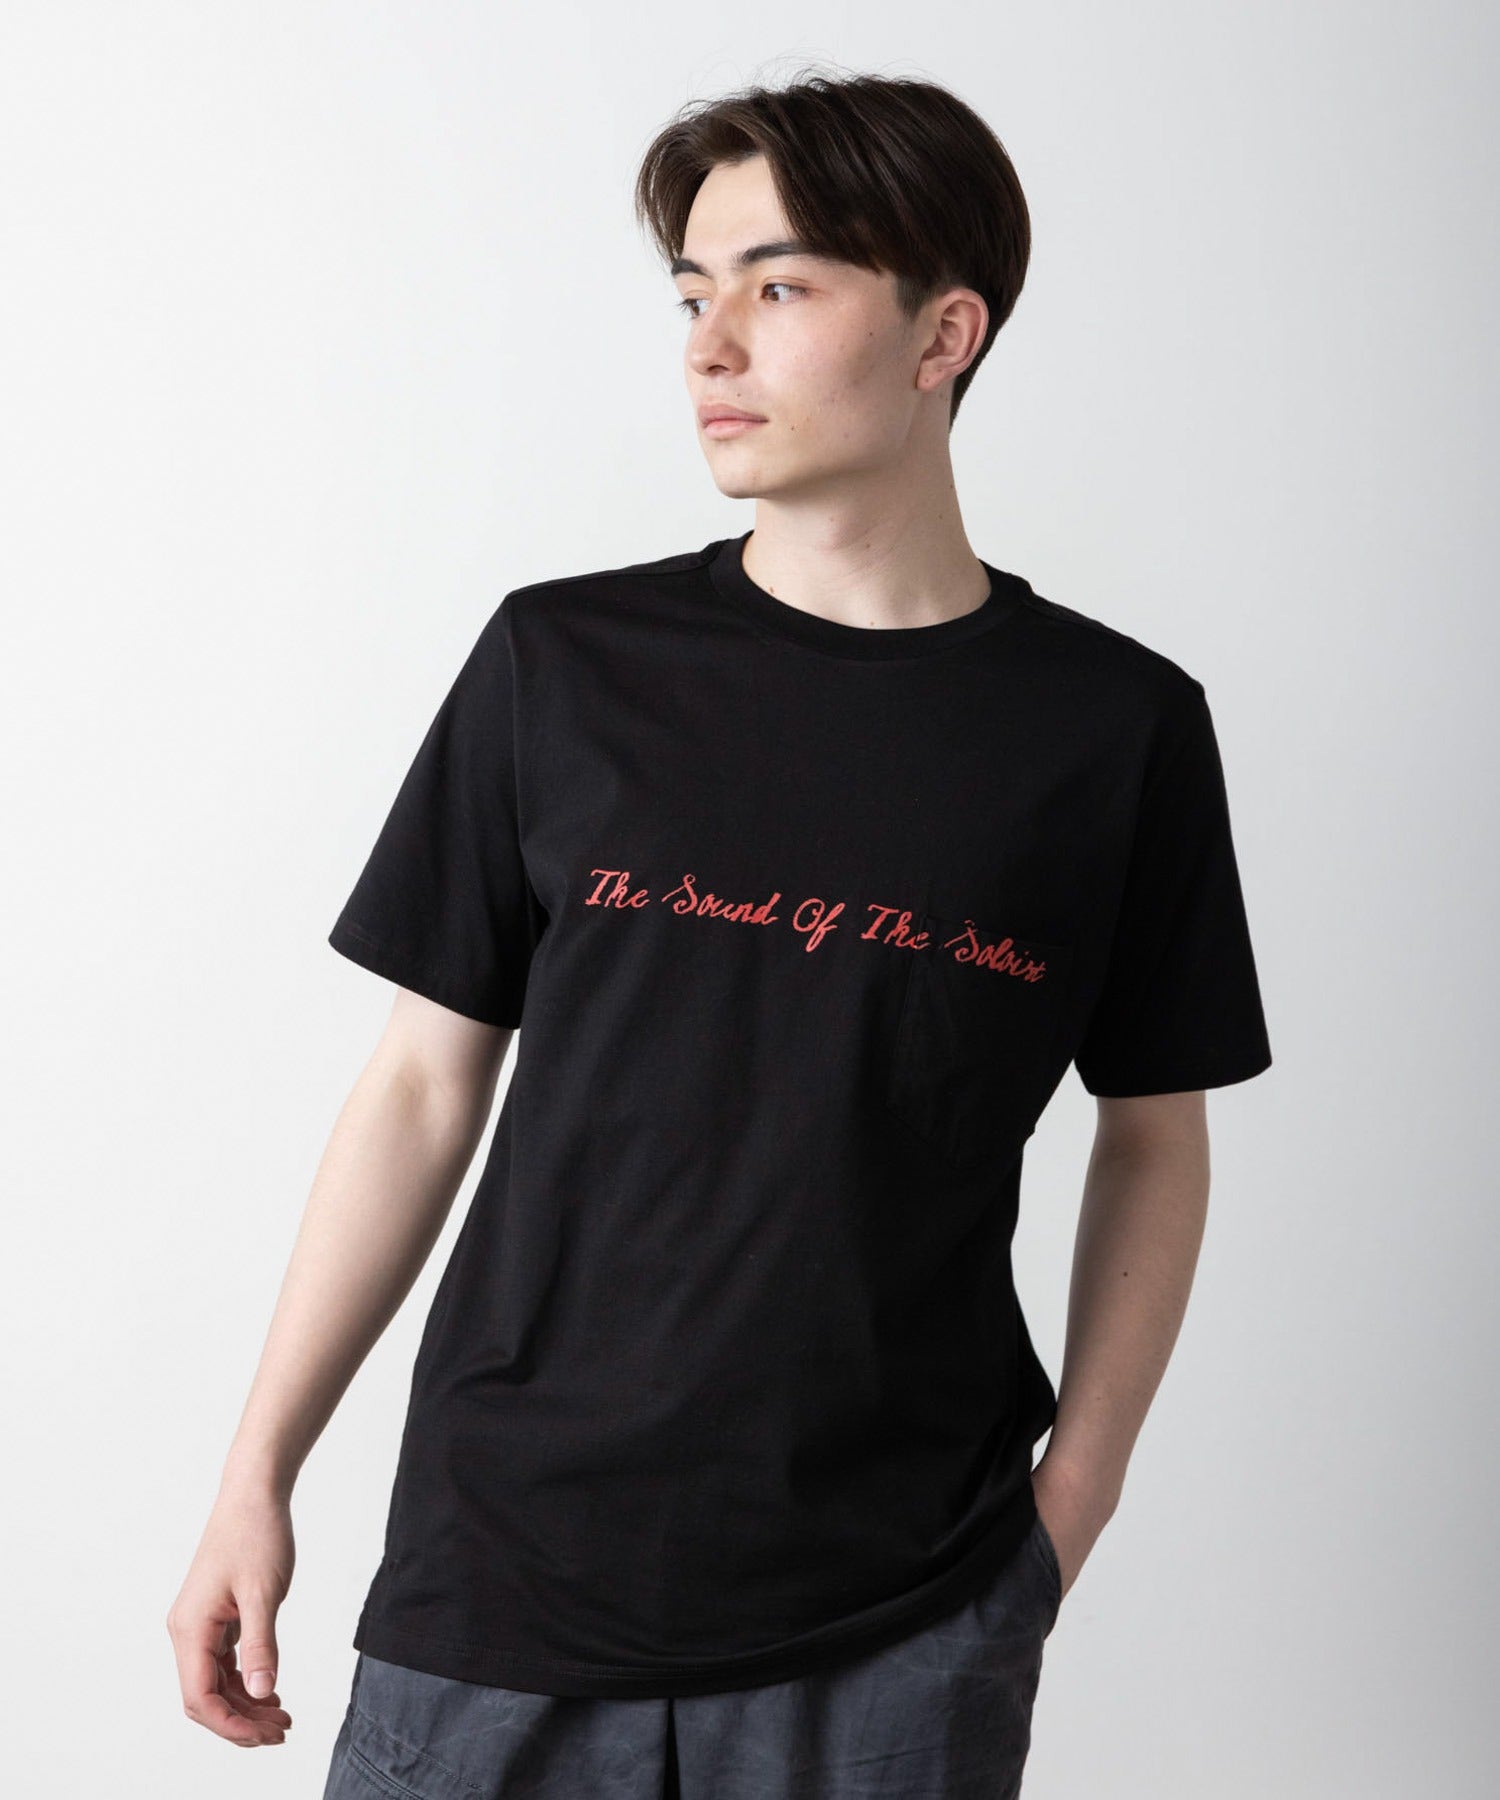 the sound of the soloist. (s/s pocket tee)